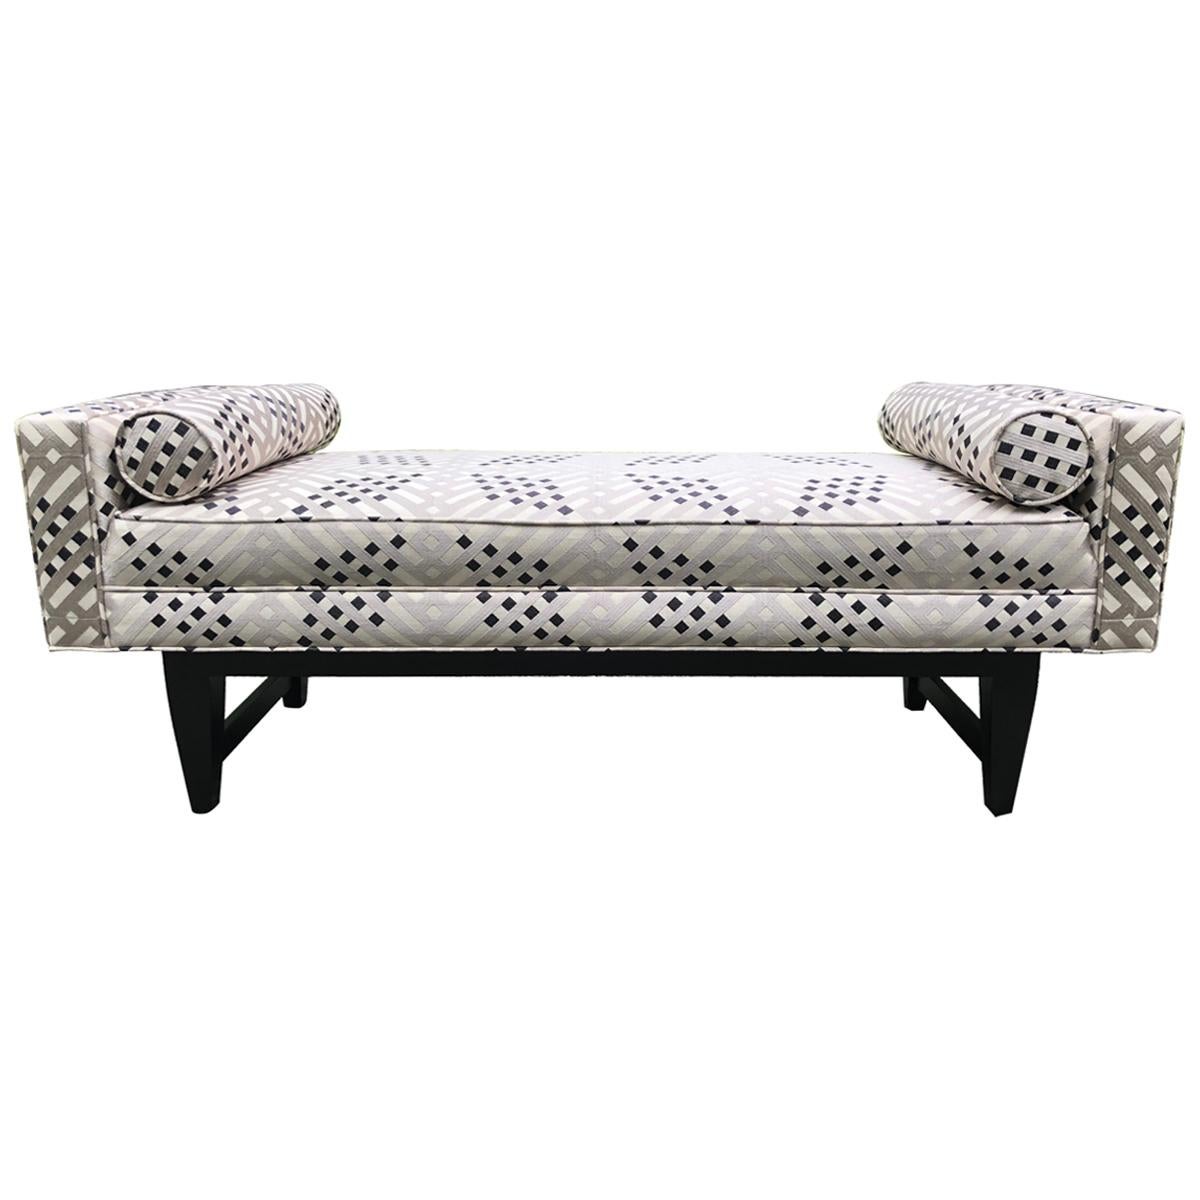 Stunning Custom Upholstered Settee Bench in Colefax and Fowler